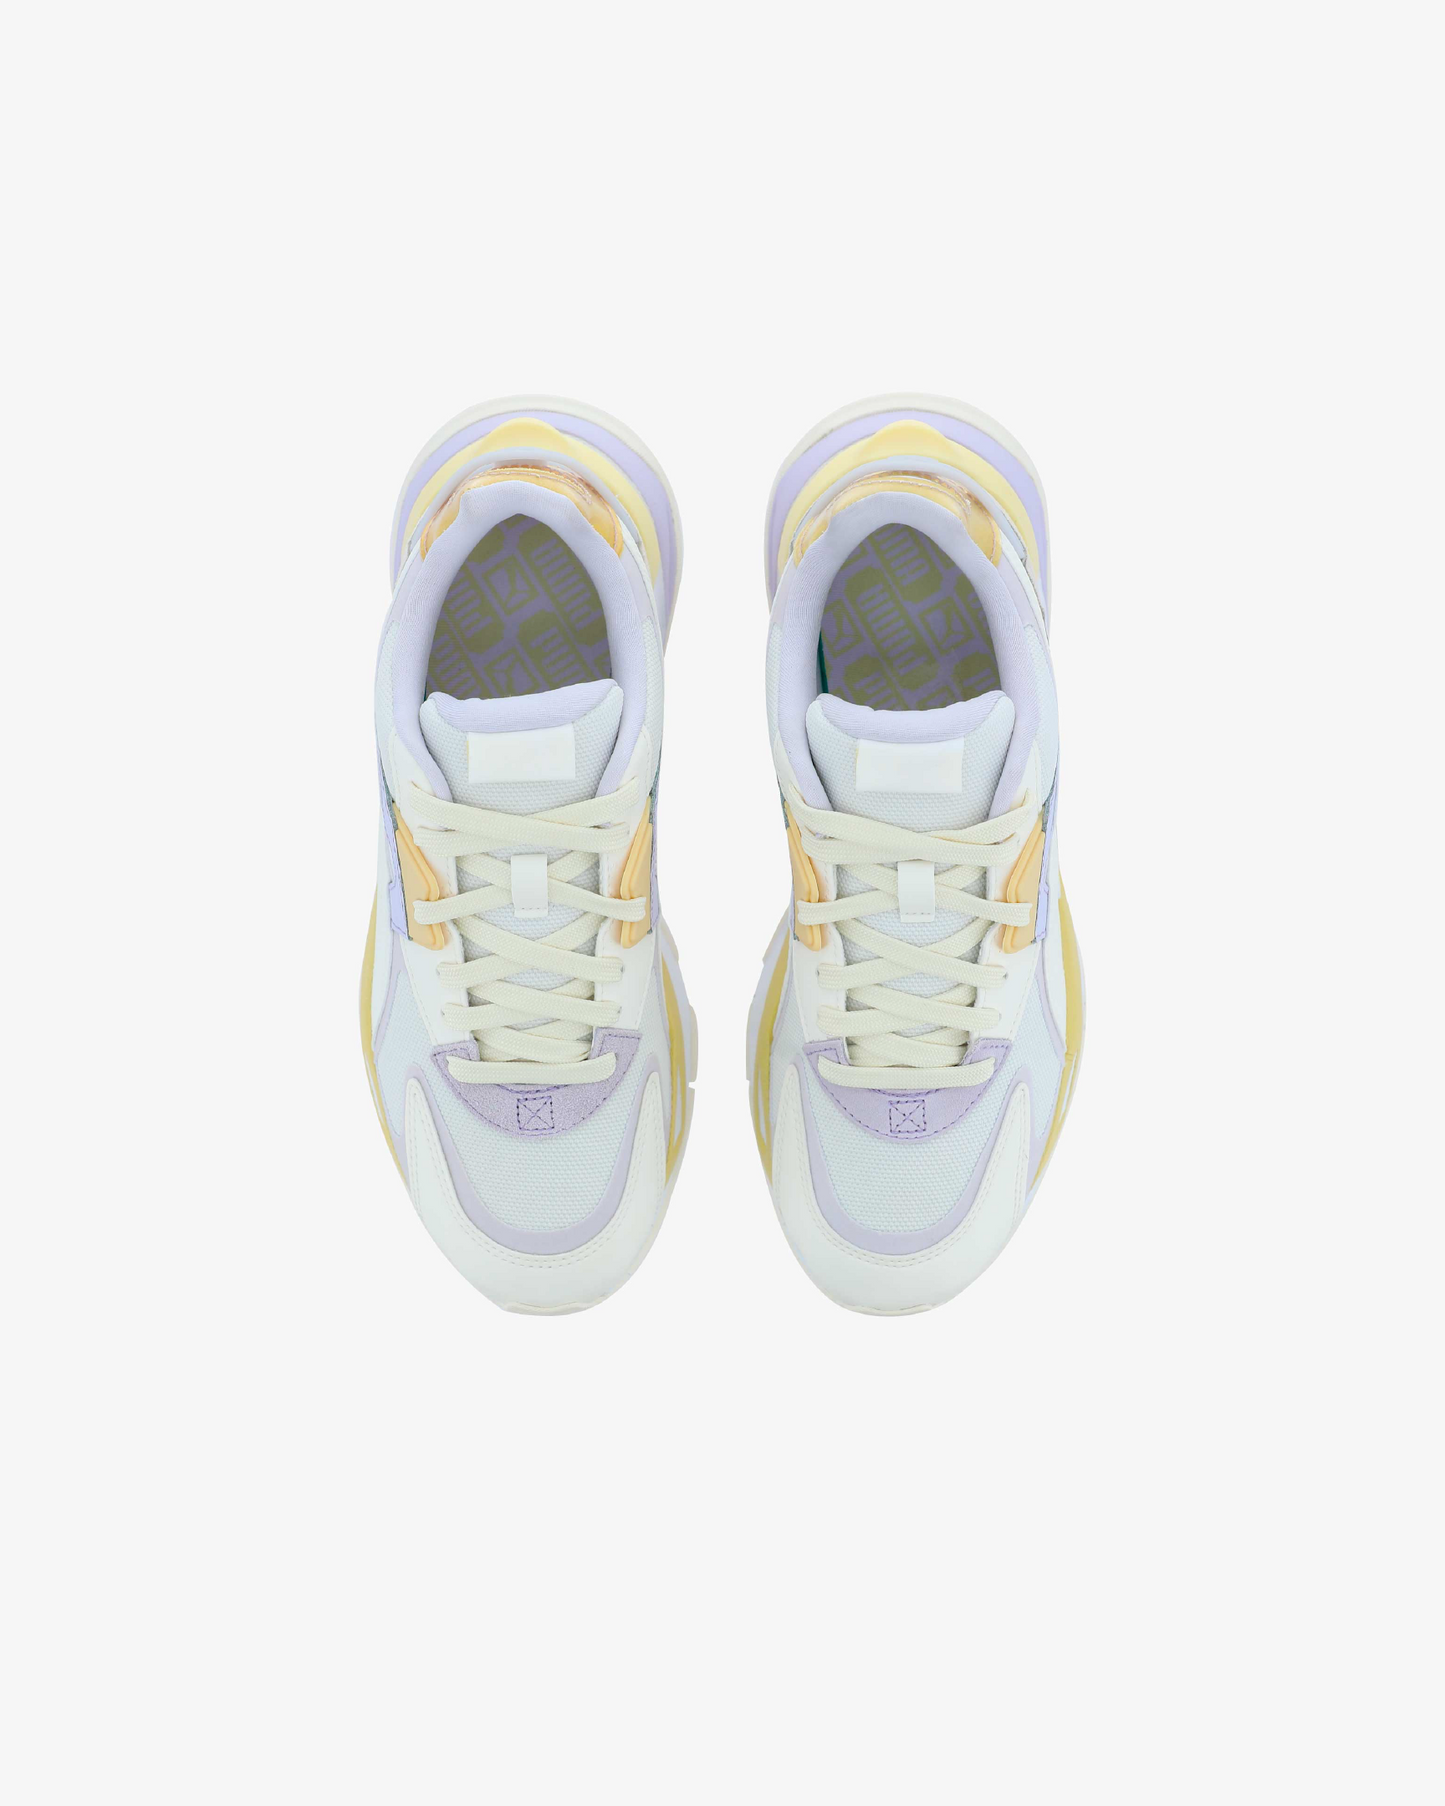 PUMA MIRAGE SPORT LOM - FROSTED IVORY